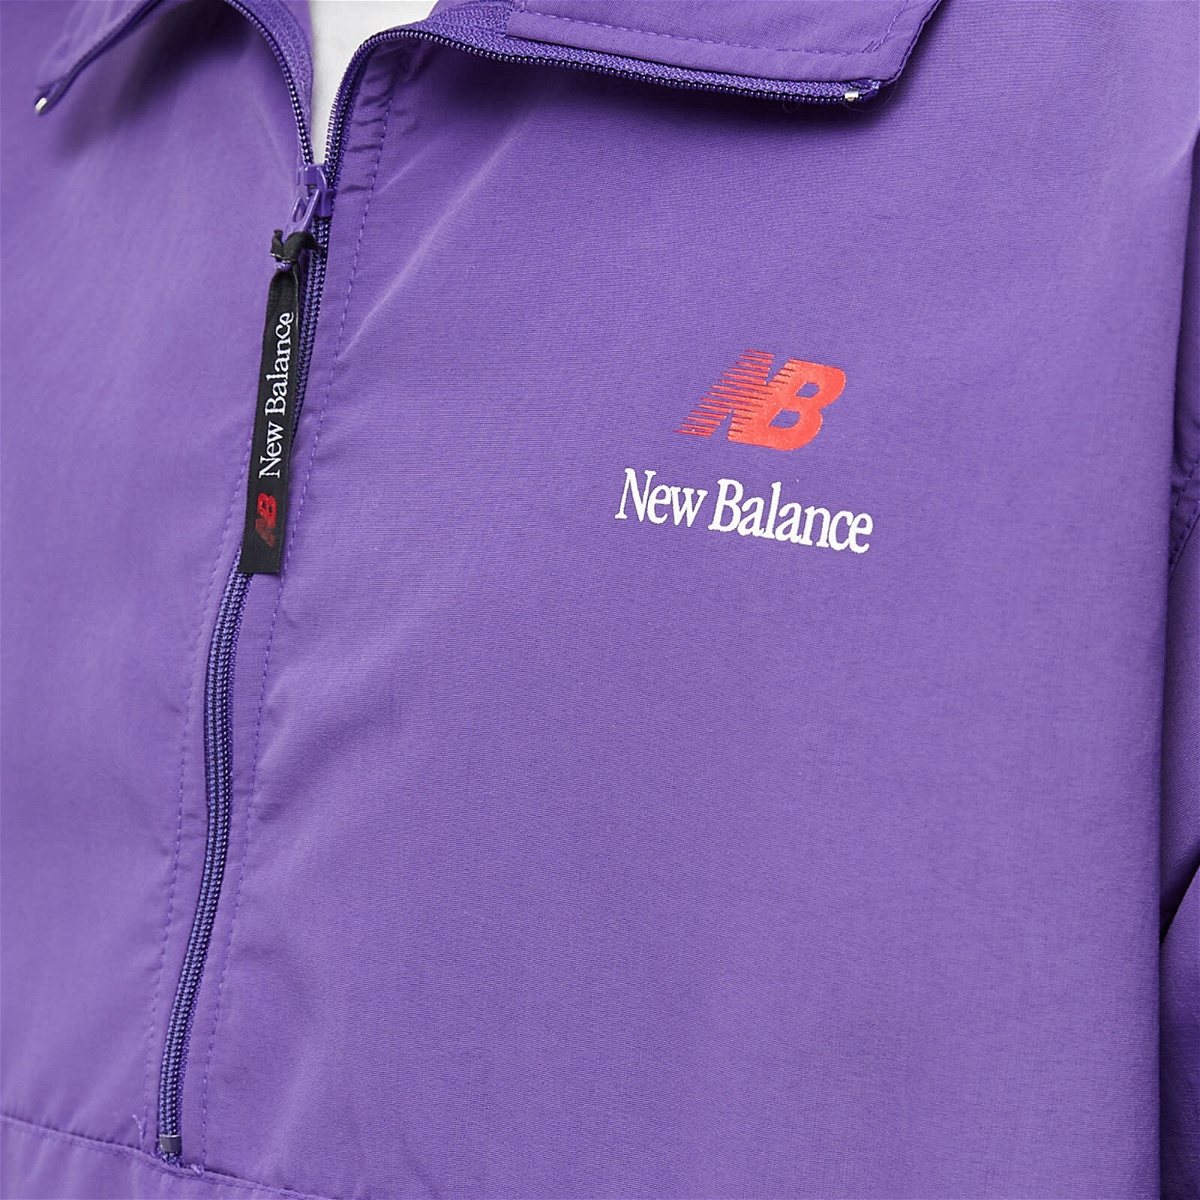 New Balance Men's Made in USA Quarter Zip in Prism Purple New Balance